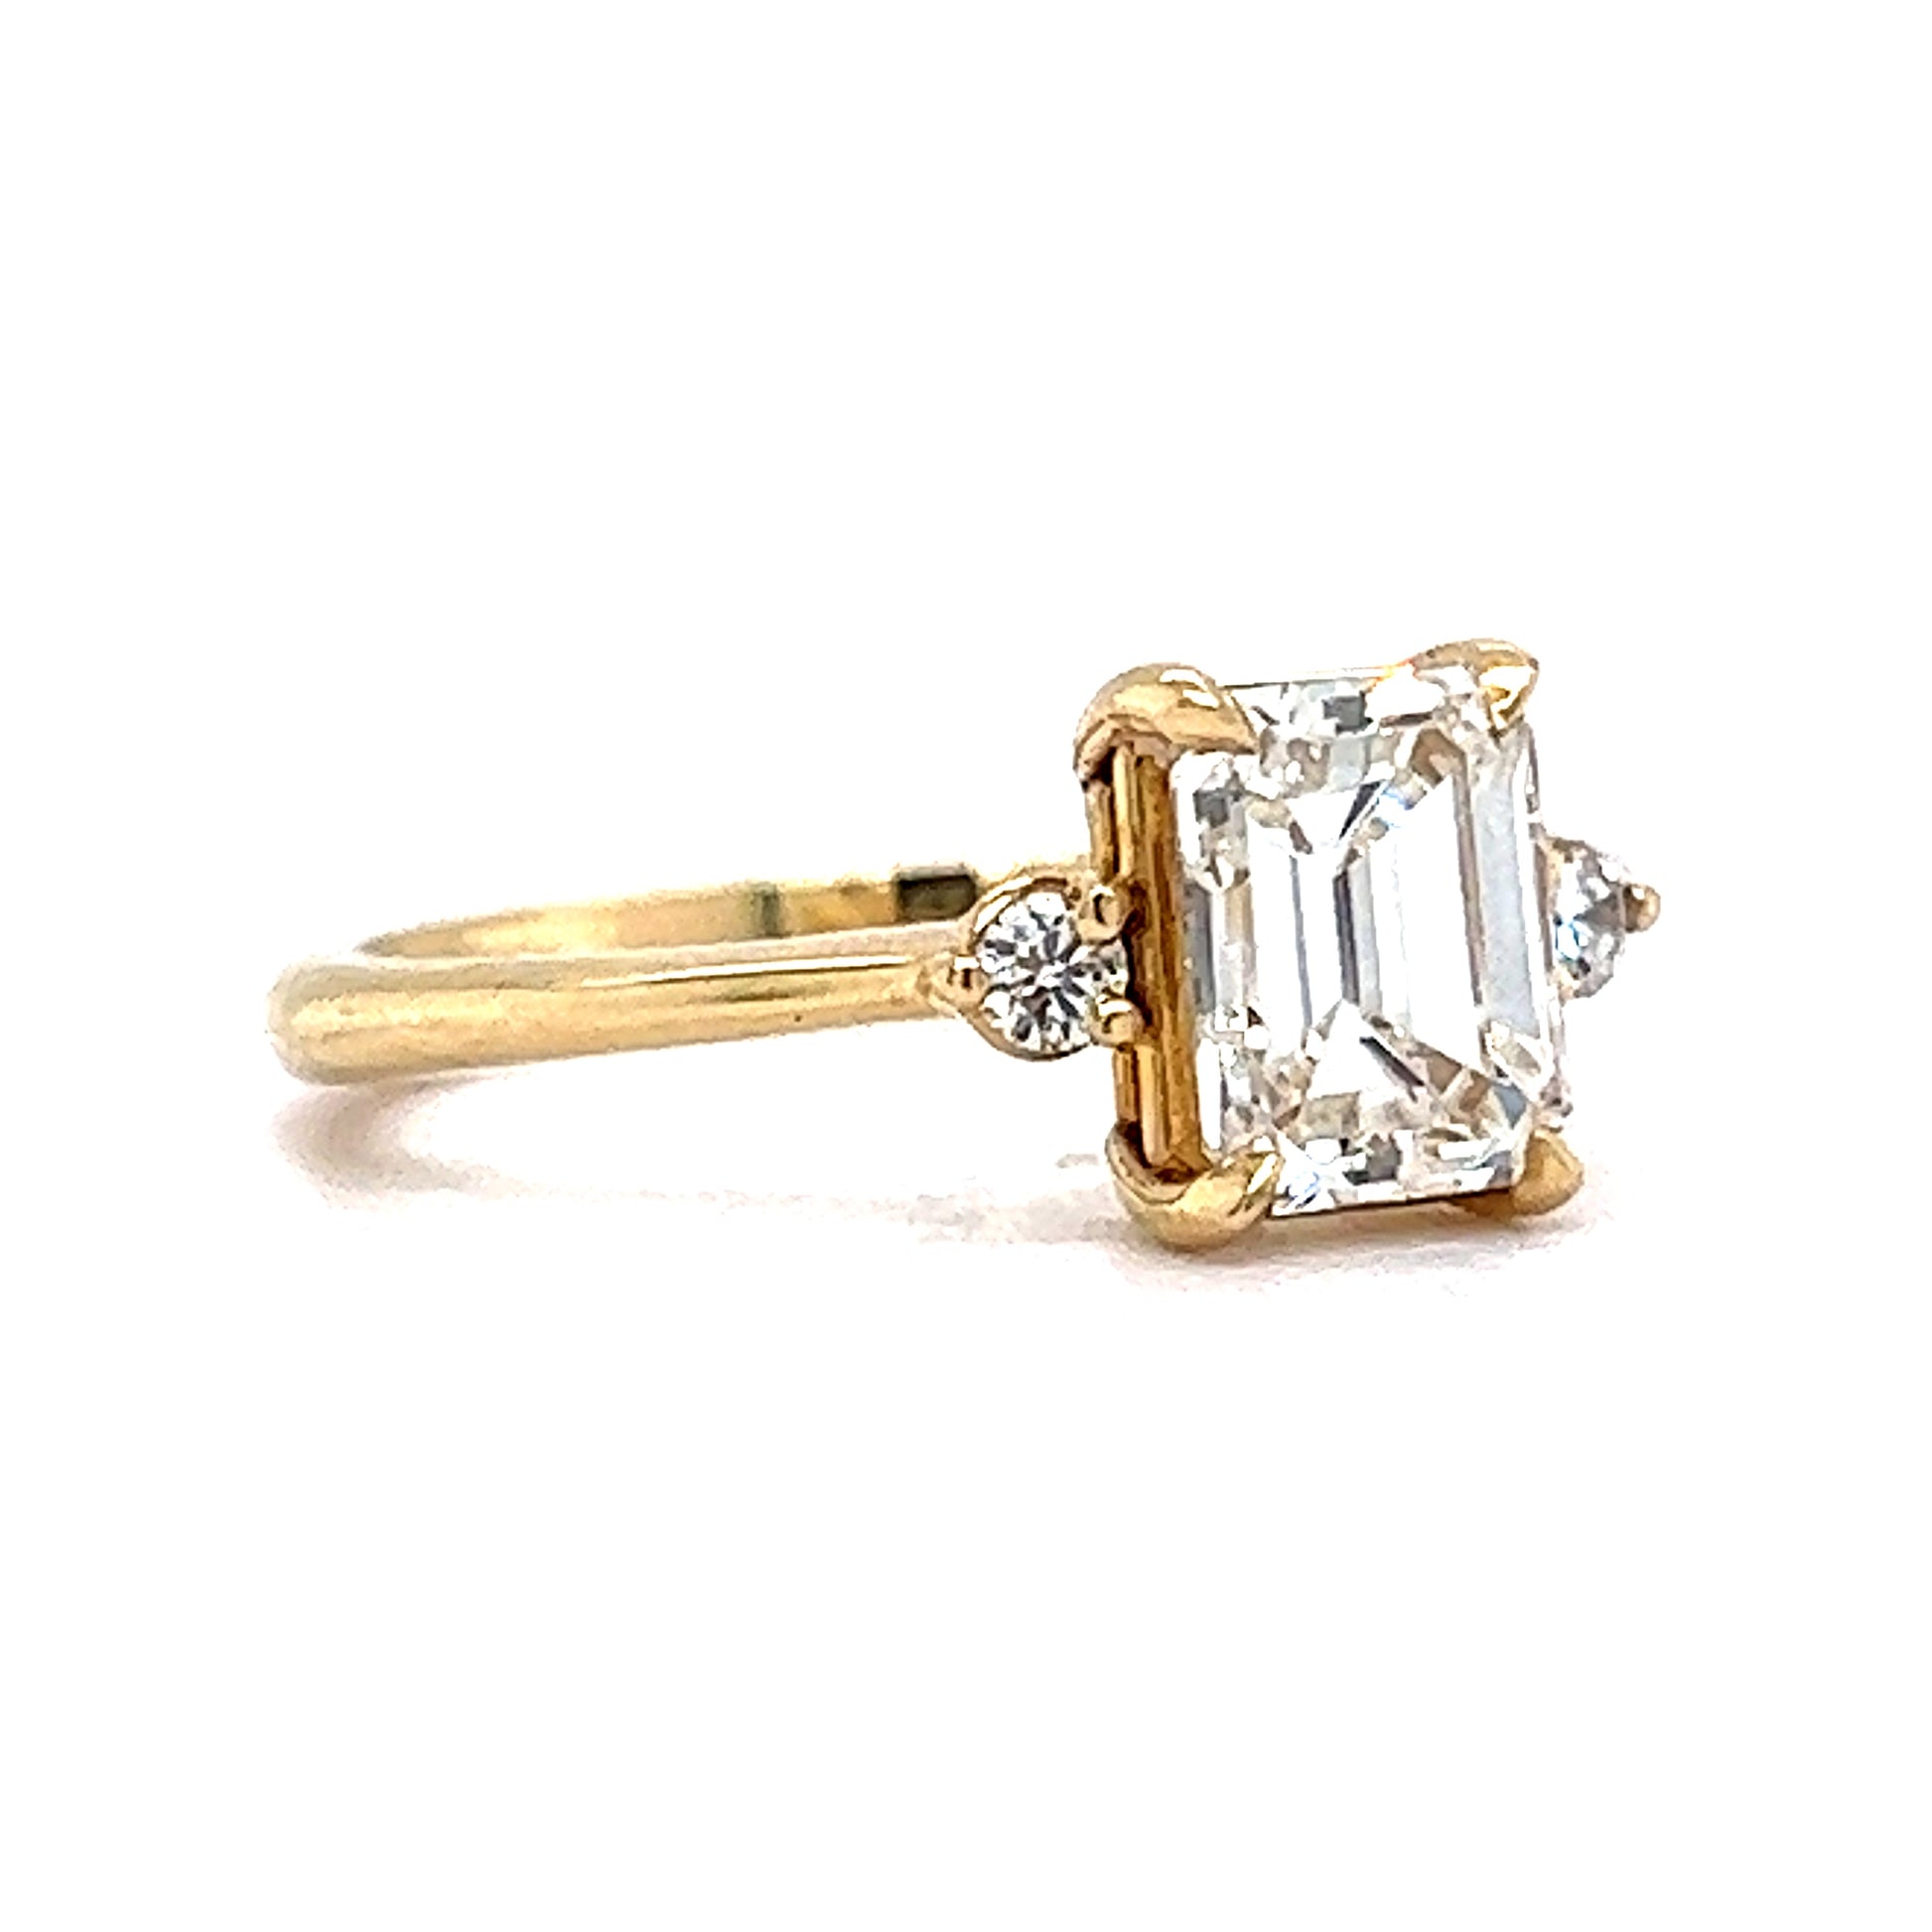 1.51 GIA Emerald Cut Diamond Engagement Ring in 14k Yellow Gold